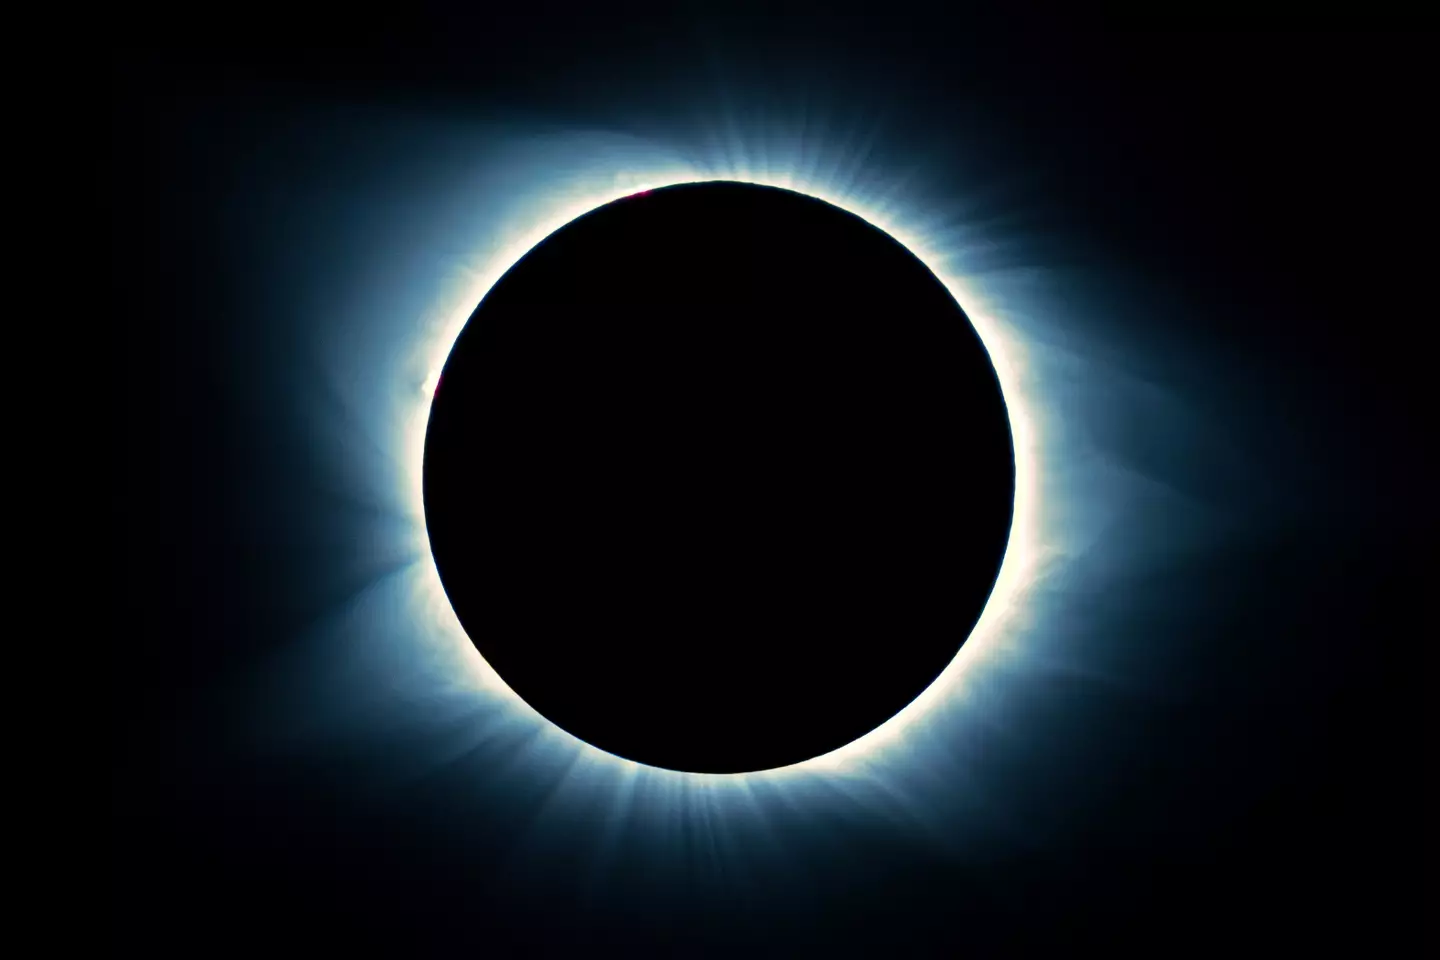 The eclipse is happening on April 8.